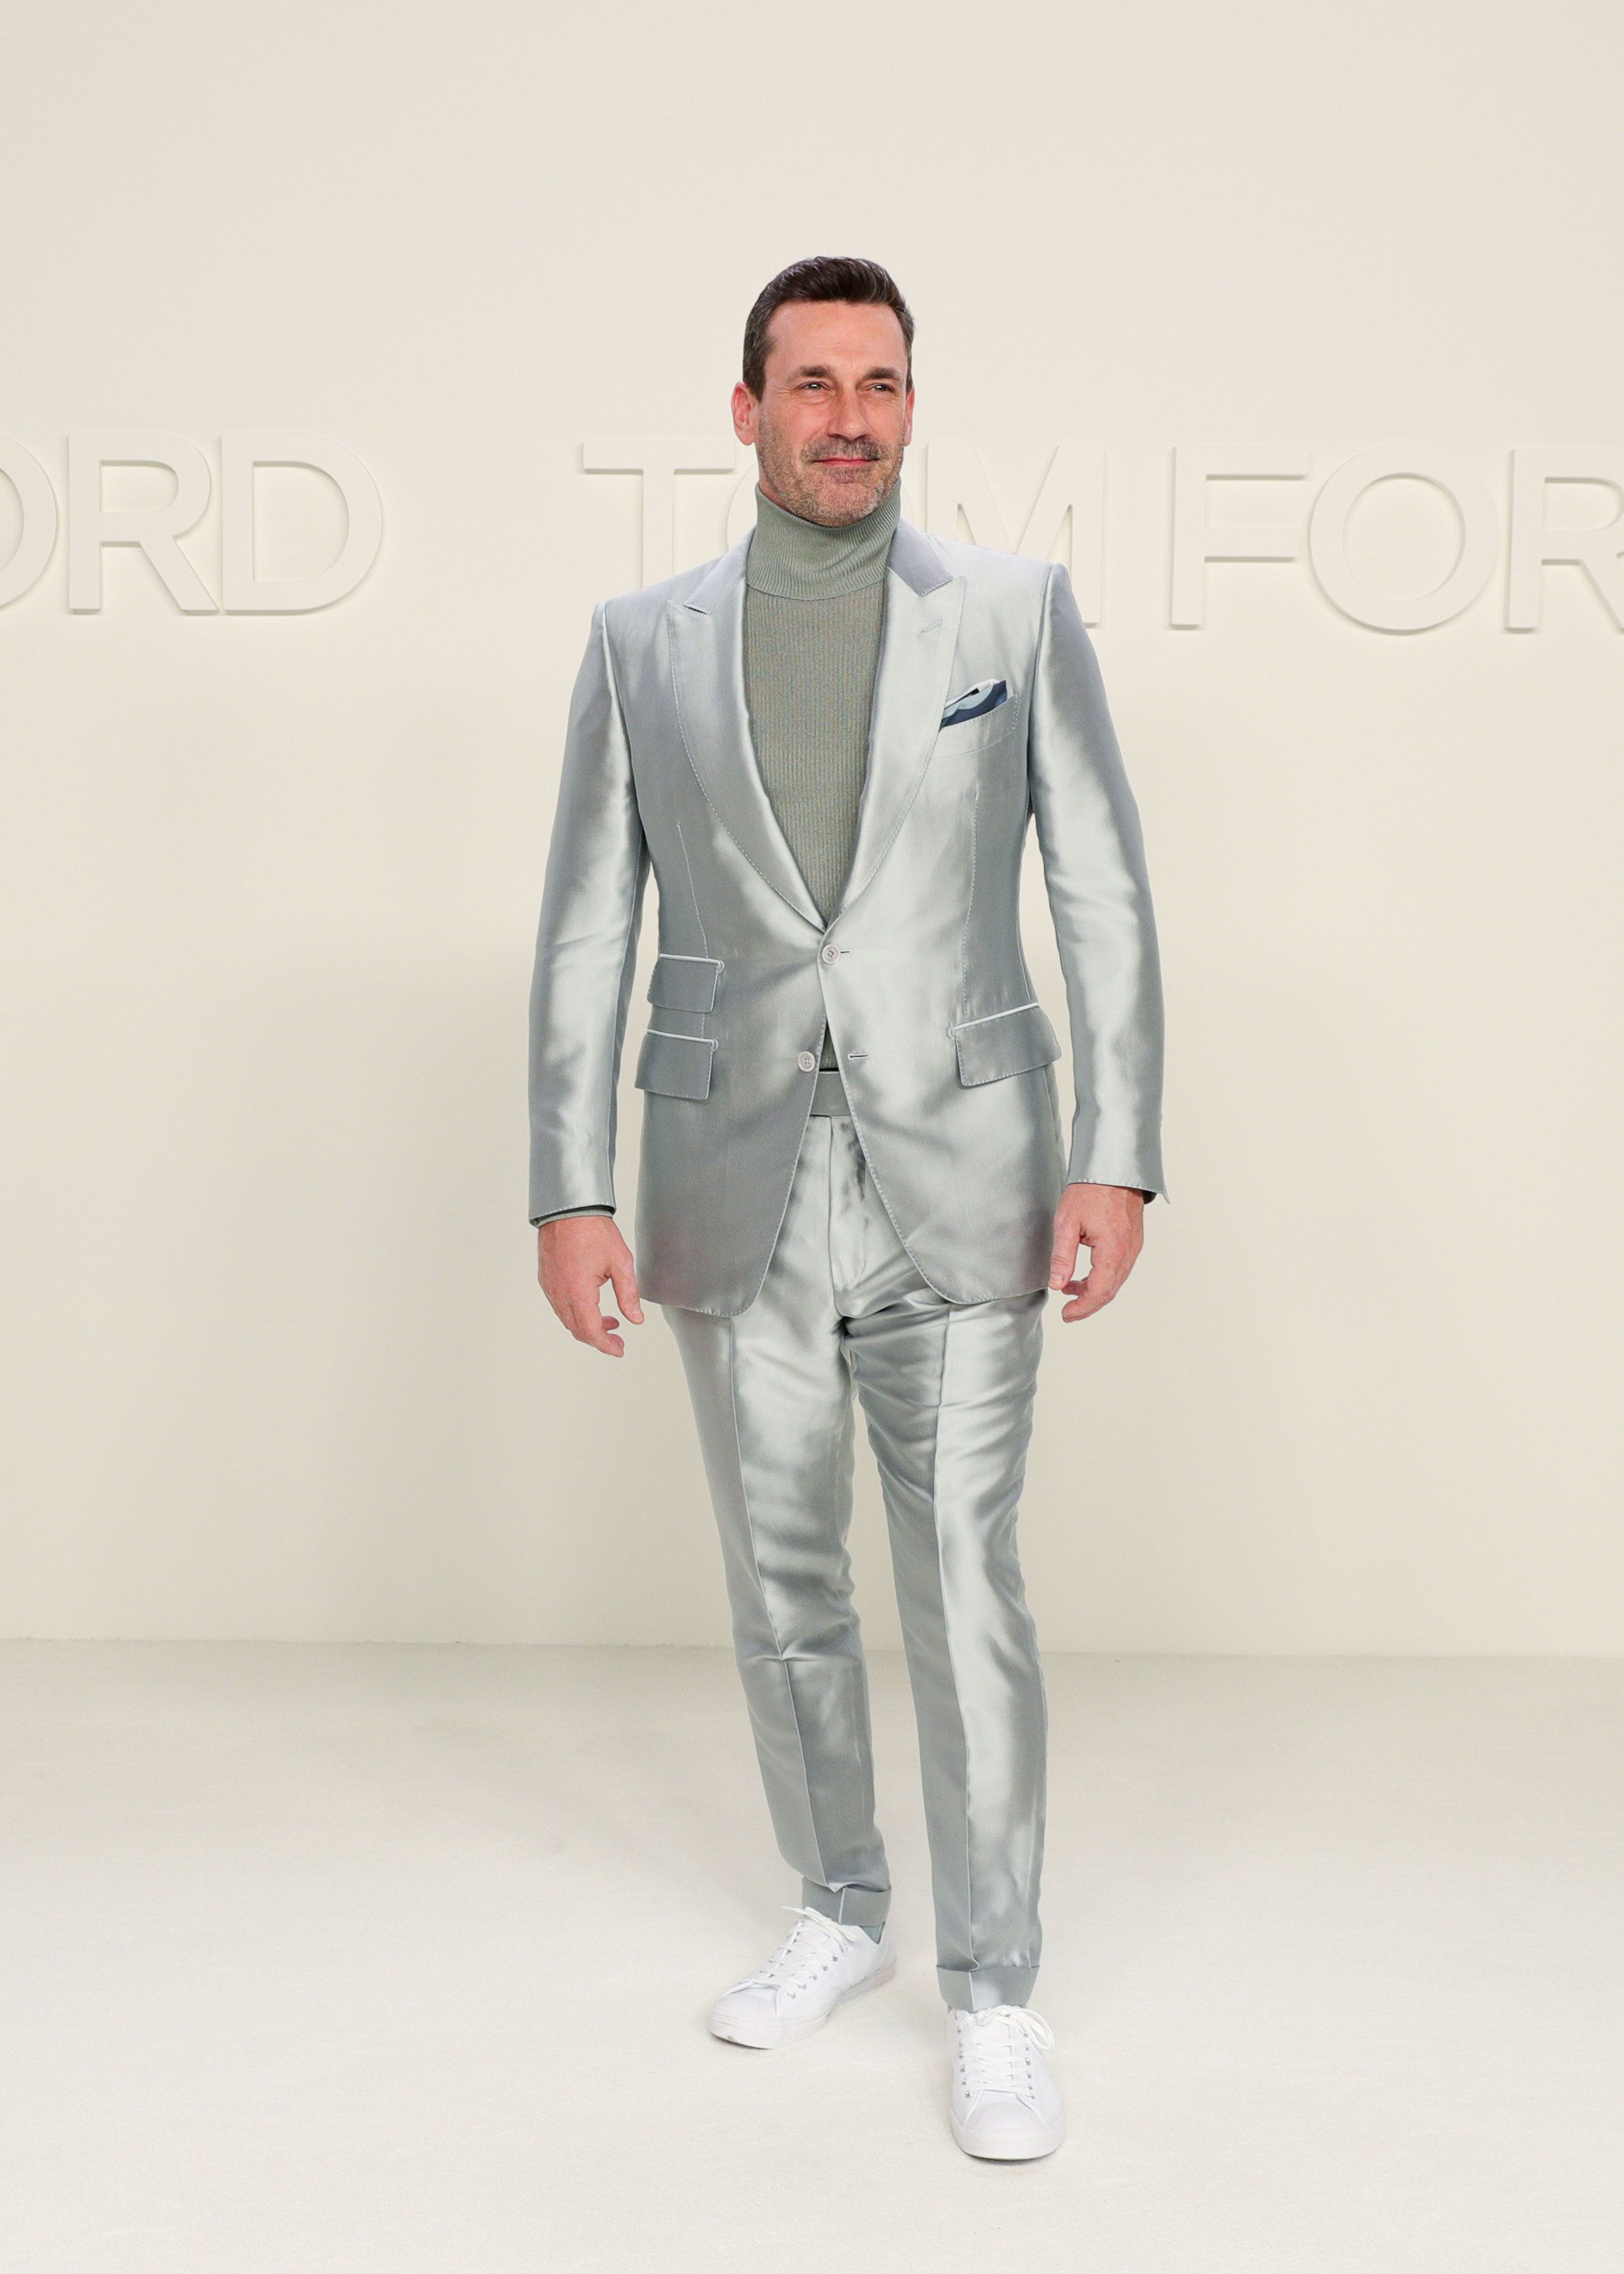 Tom Ford's First Post-Exit Interview: Bridget Foley Reports - Air Mail